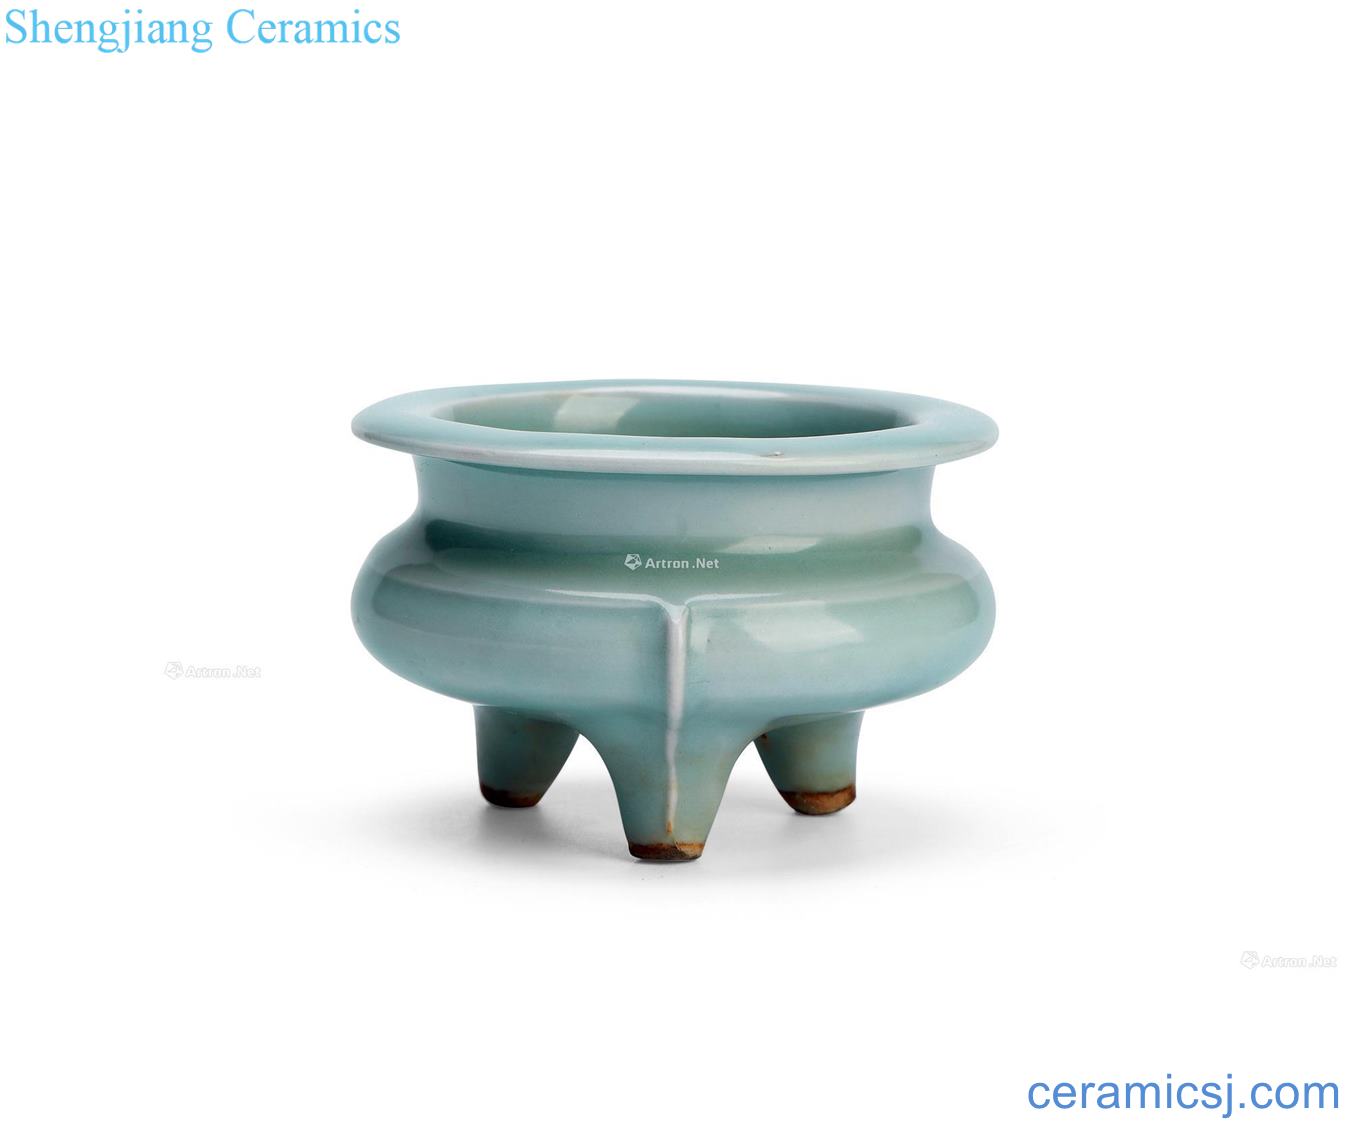 The southern song dynasty longquan celadon by type furnace with three legs